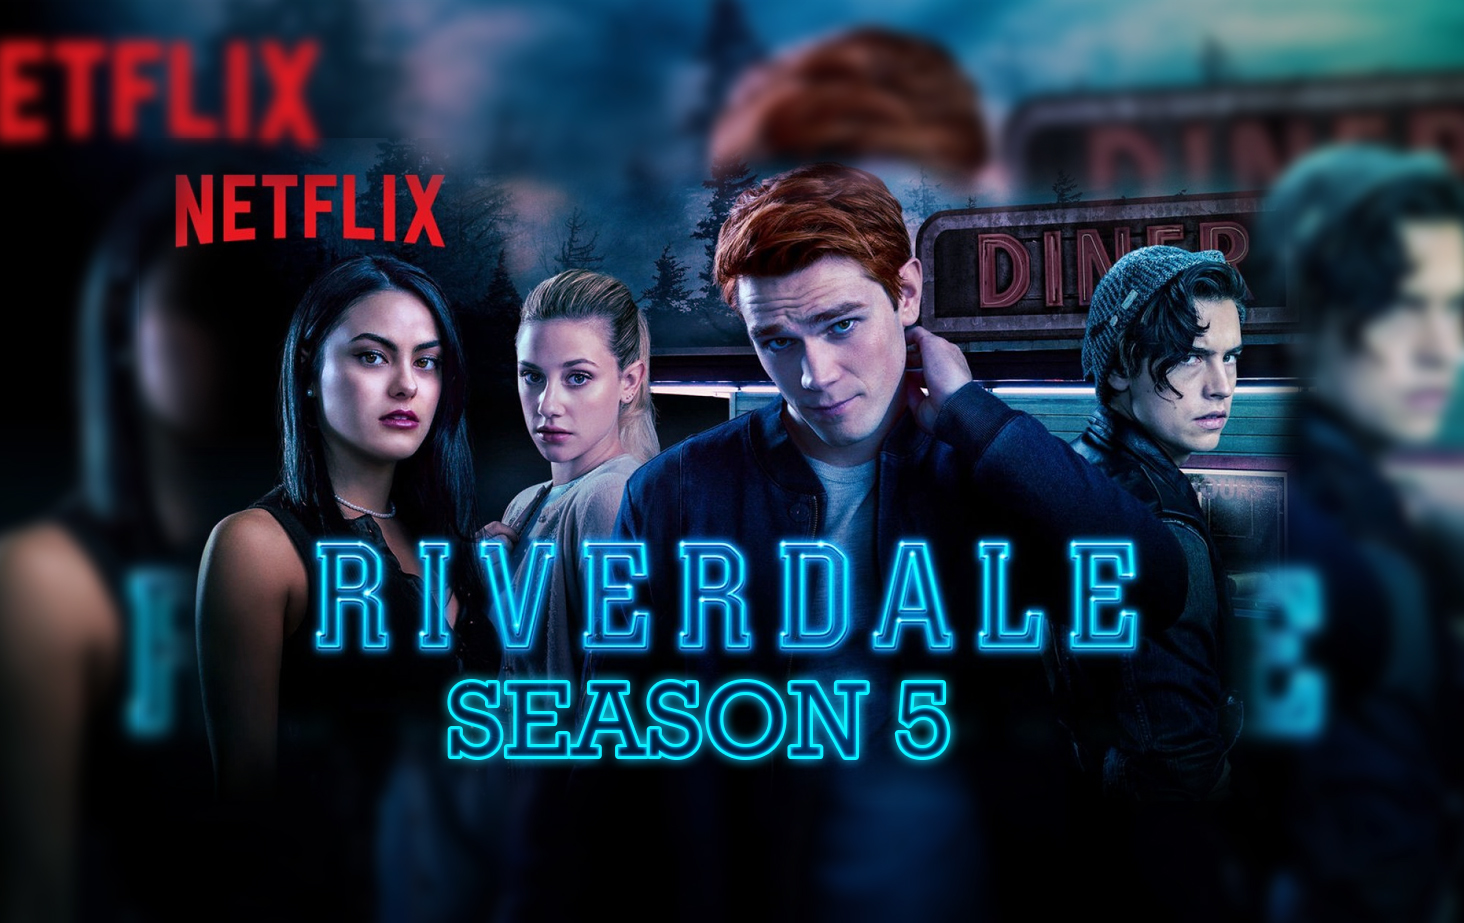 Riverdale Season 5 Release Date Cast Trailer and spoilers